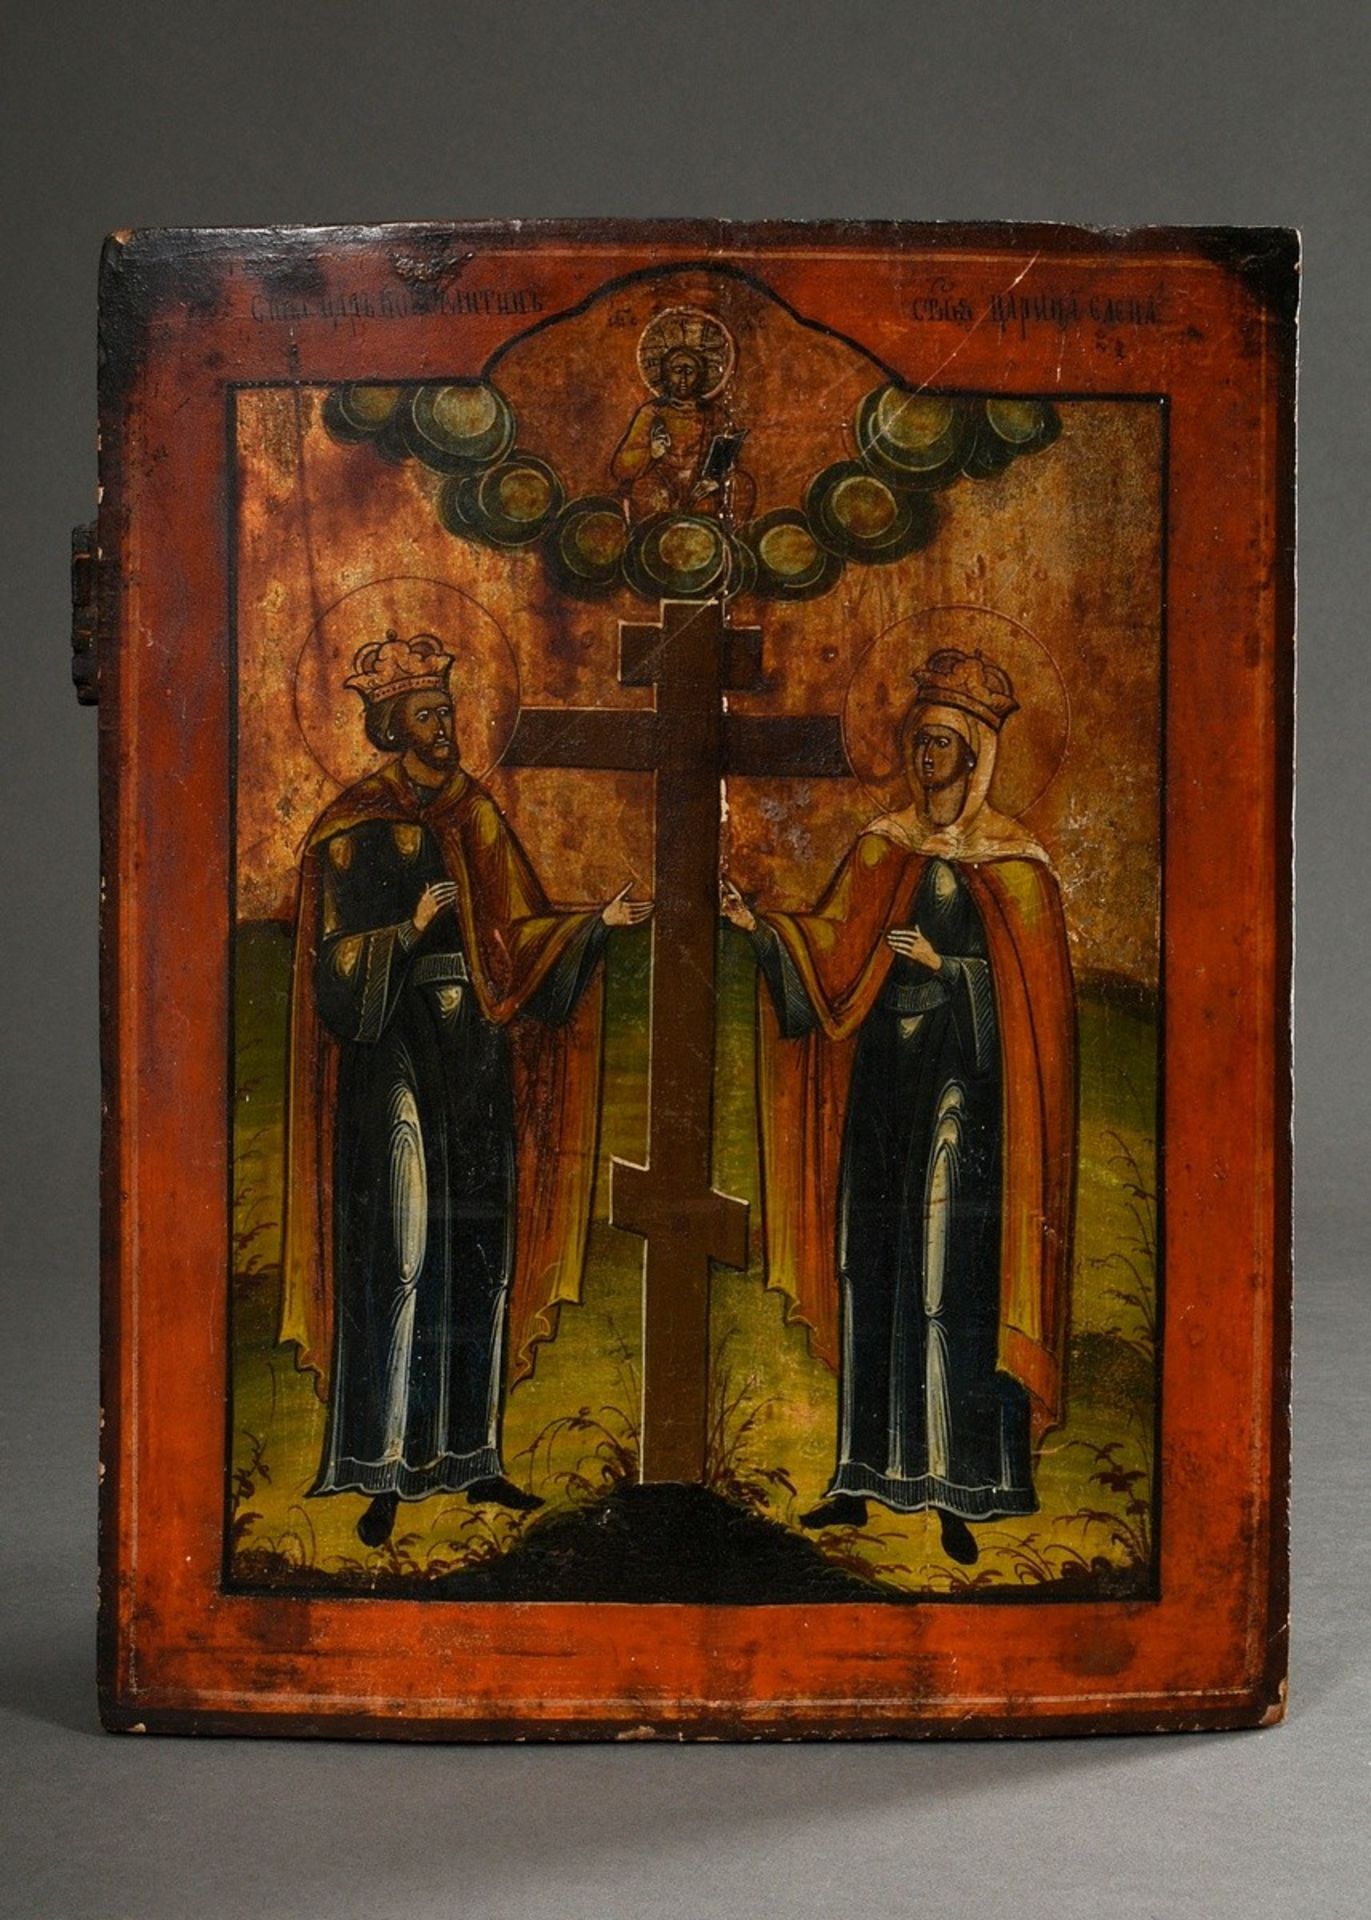 Rural South Russian icon "The Finding of the Cross by Emperor Constantine and his Mother Helena", l